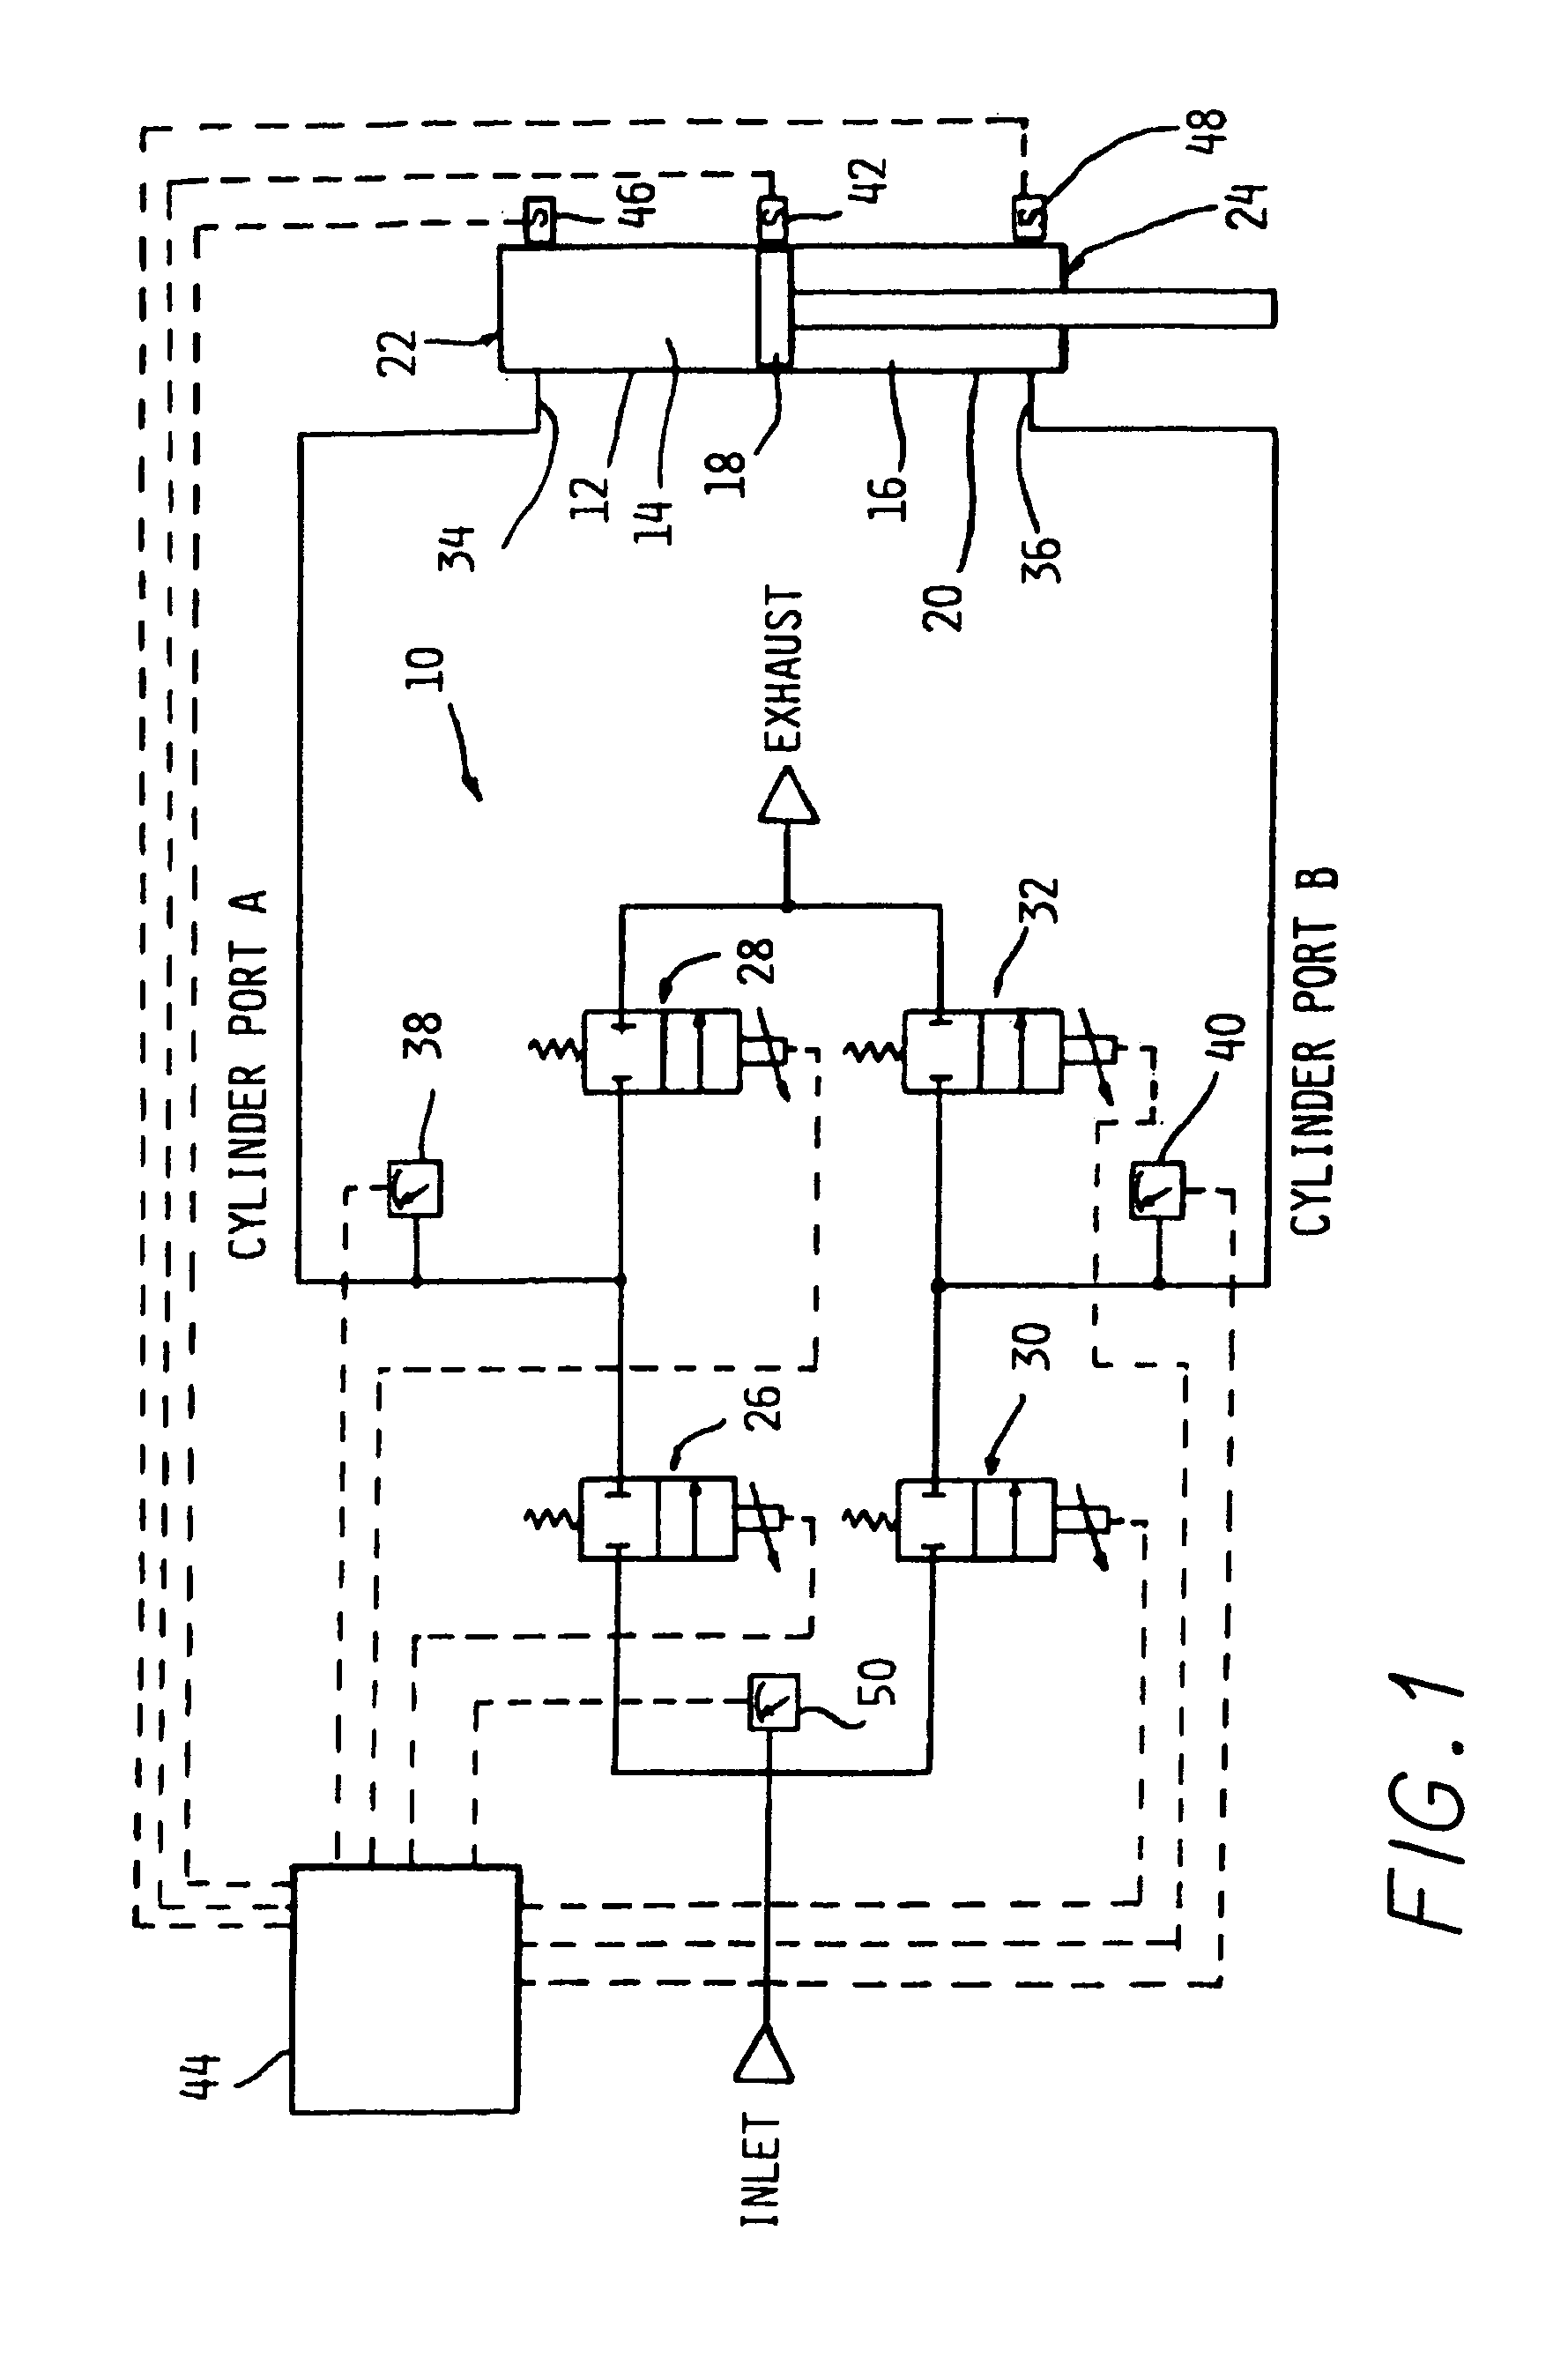 Multi-valve fluid operated cylinder positioning system